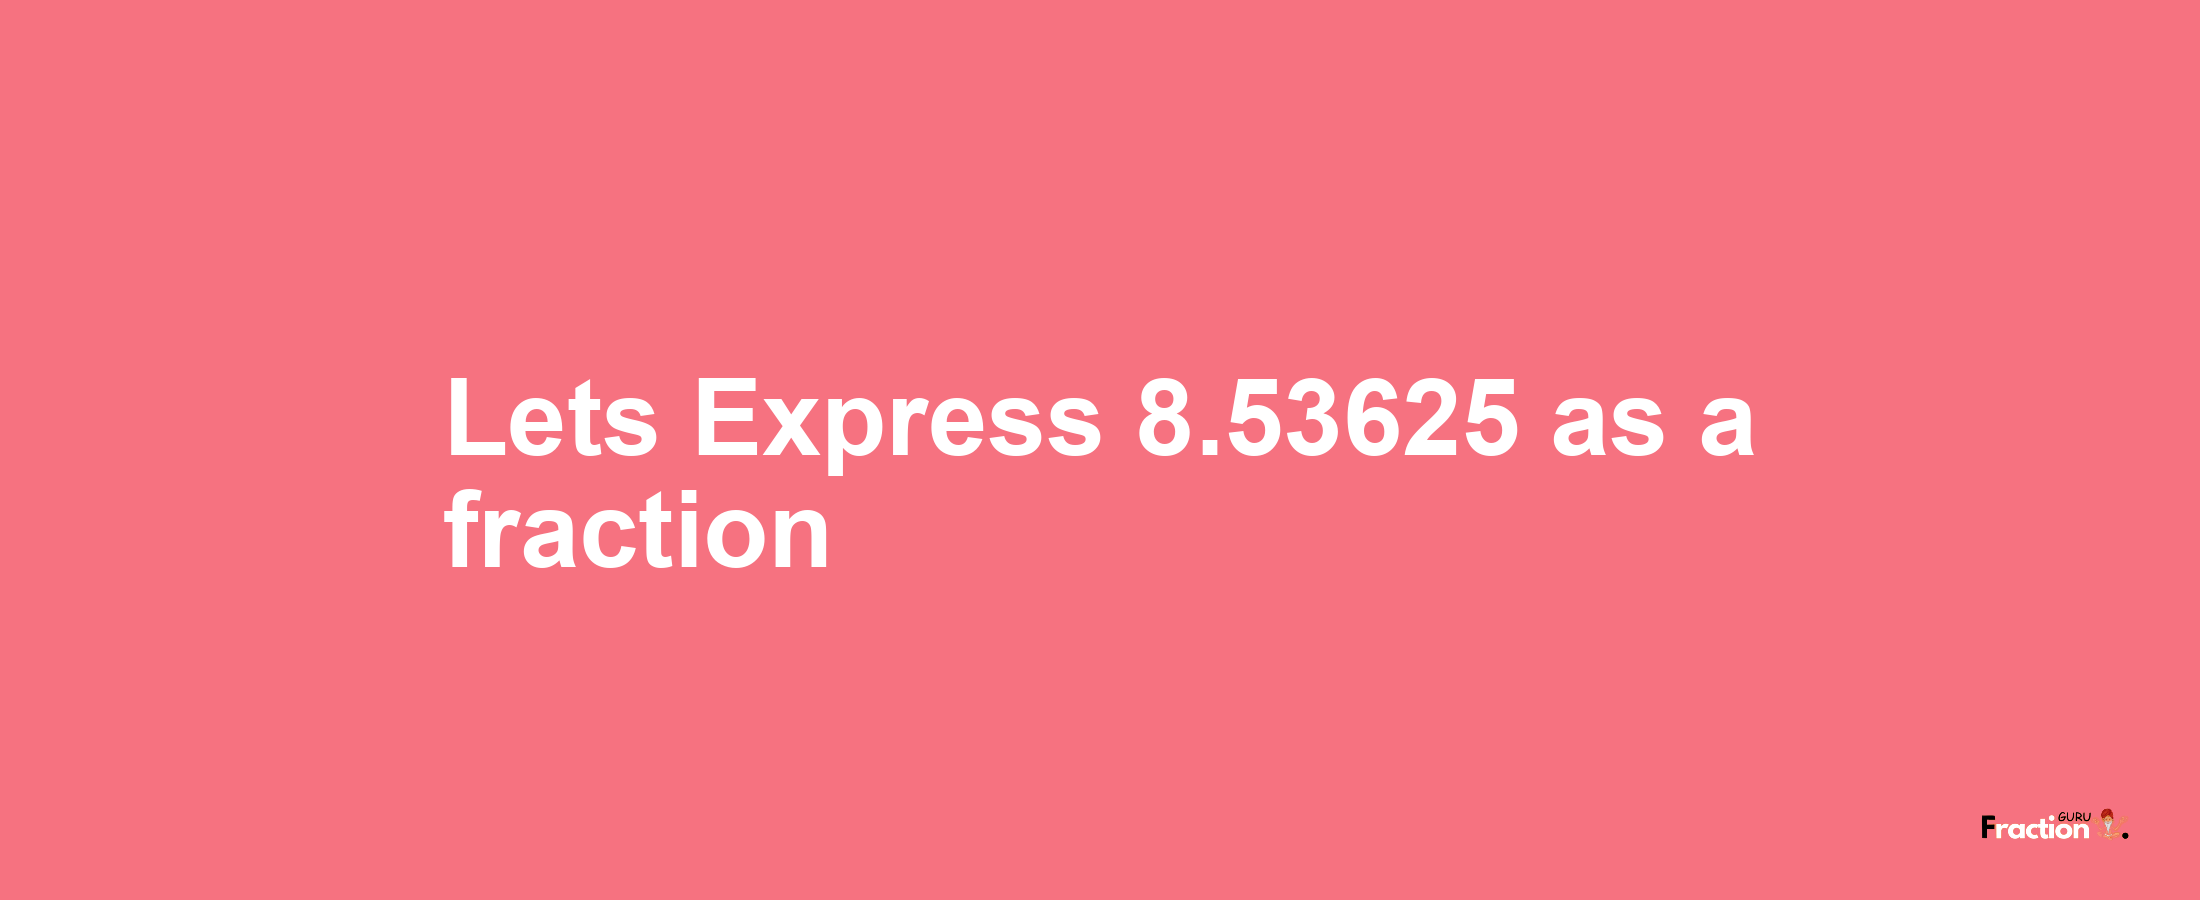 Lets Express 8.53625 as afraction